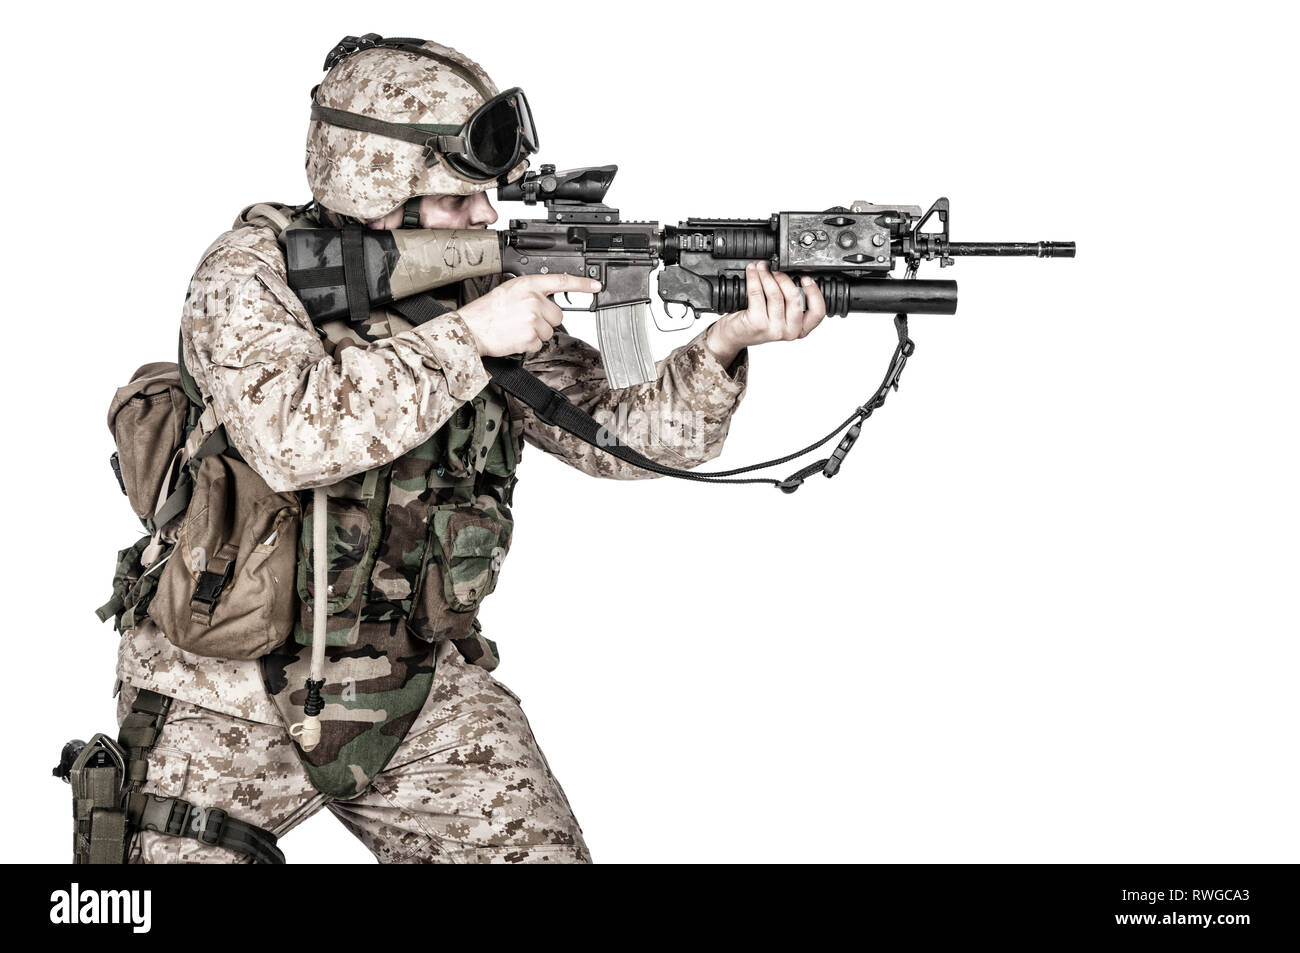 Studio shot of soldier with machine gun, isolated on white background. Stock Photo